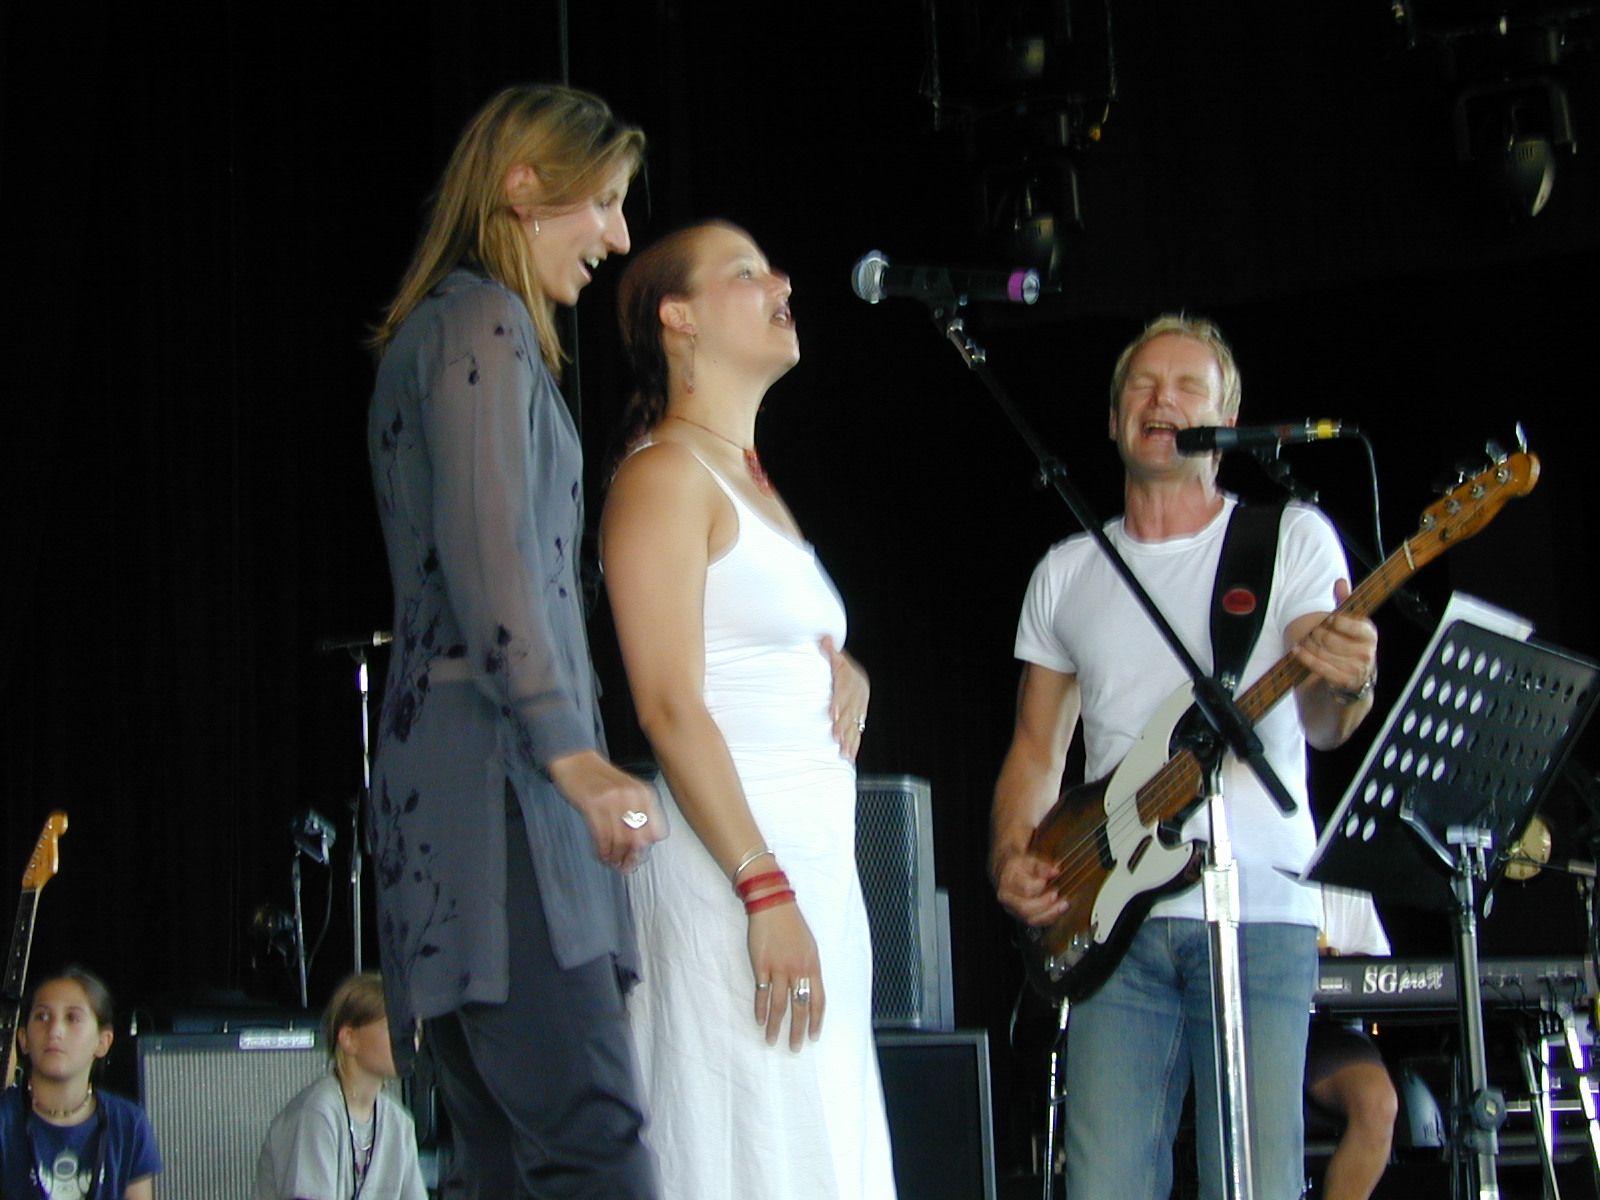 On Stage with Sting, Concord Pavilion